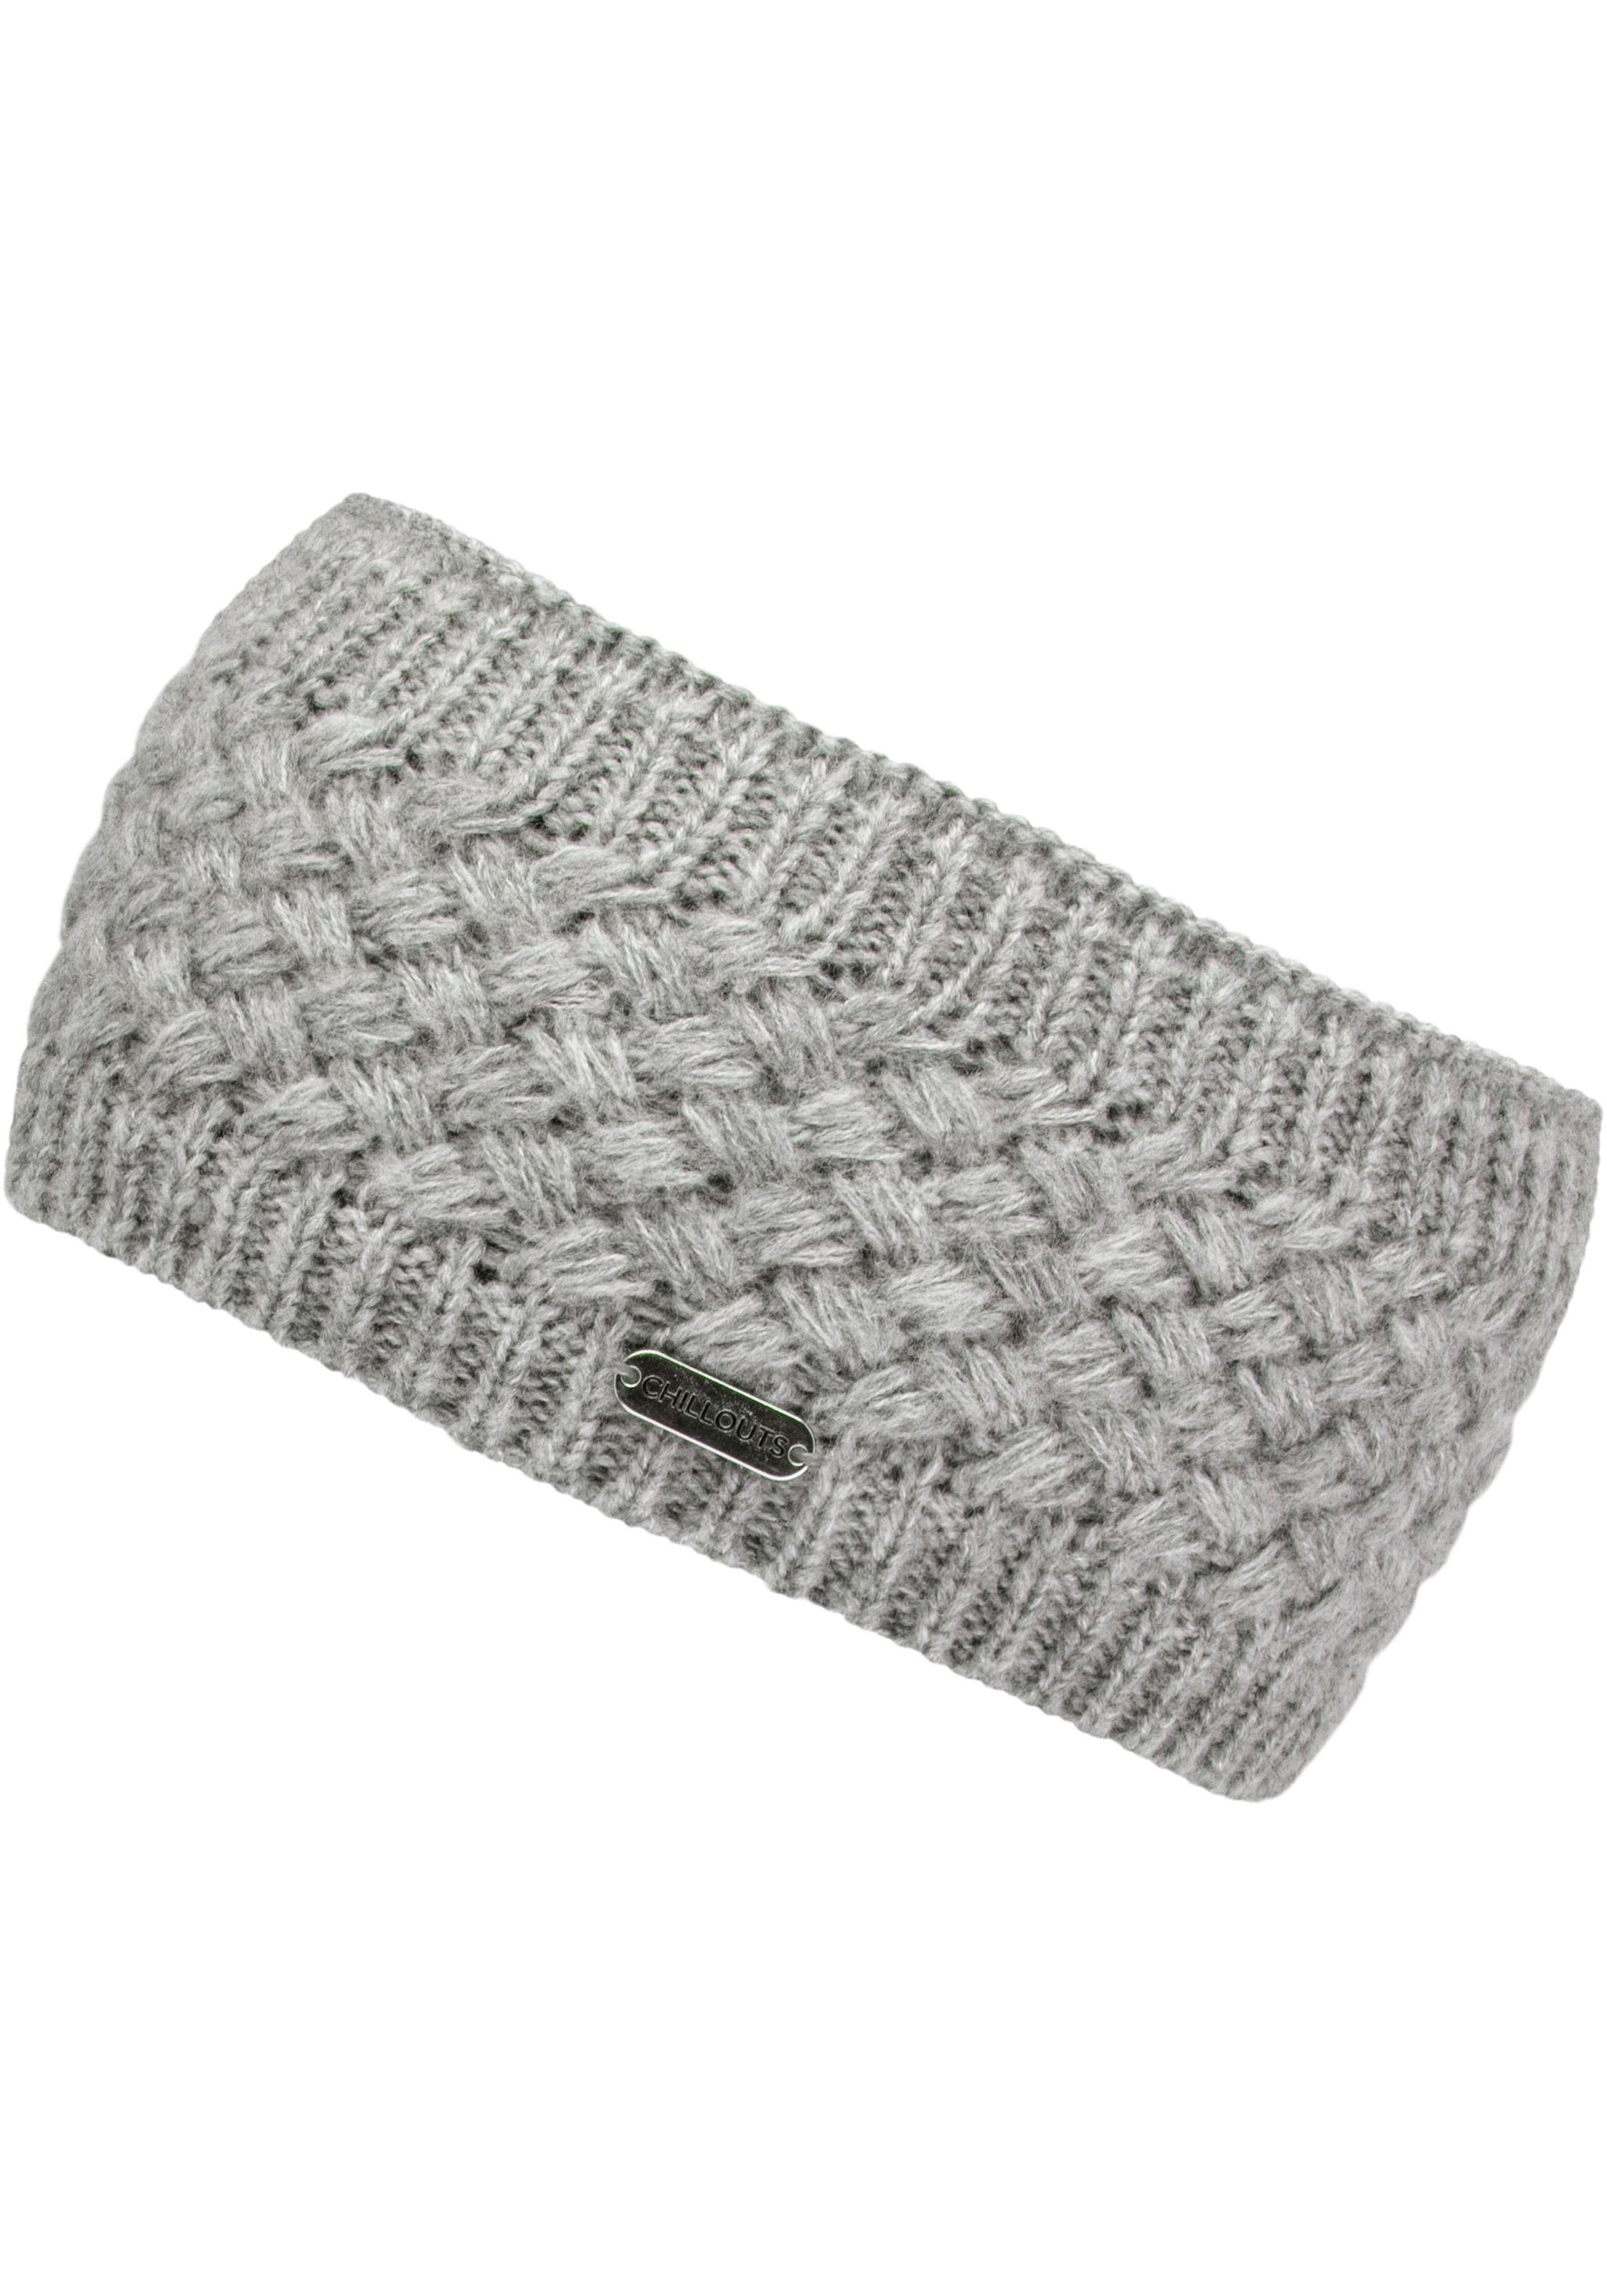 chillouts Stirnband "Felicitas Headband", Metall-Label